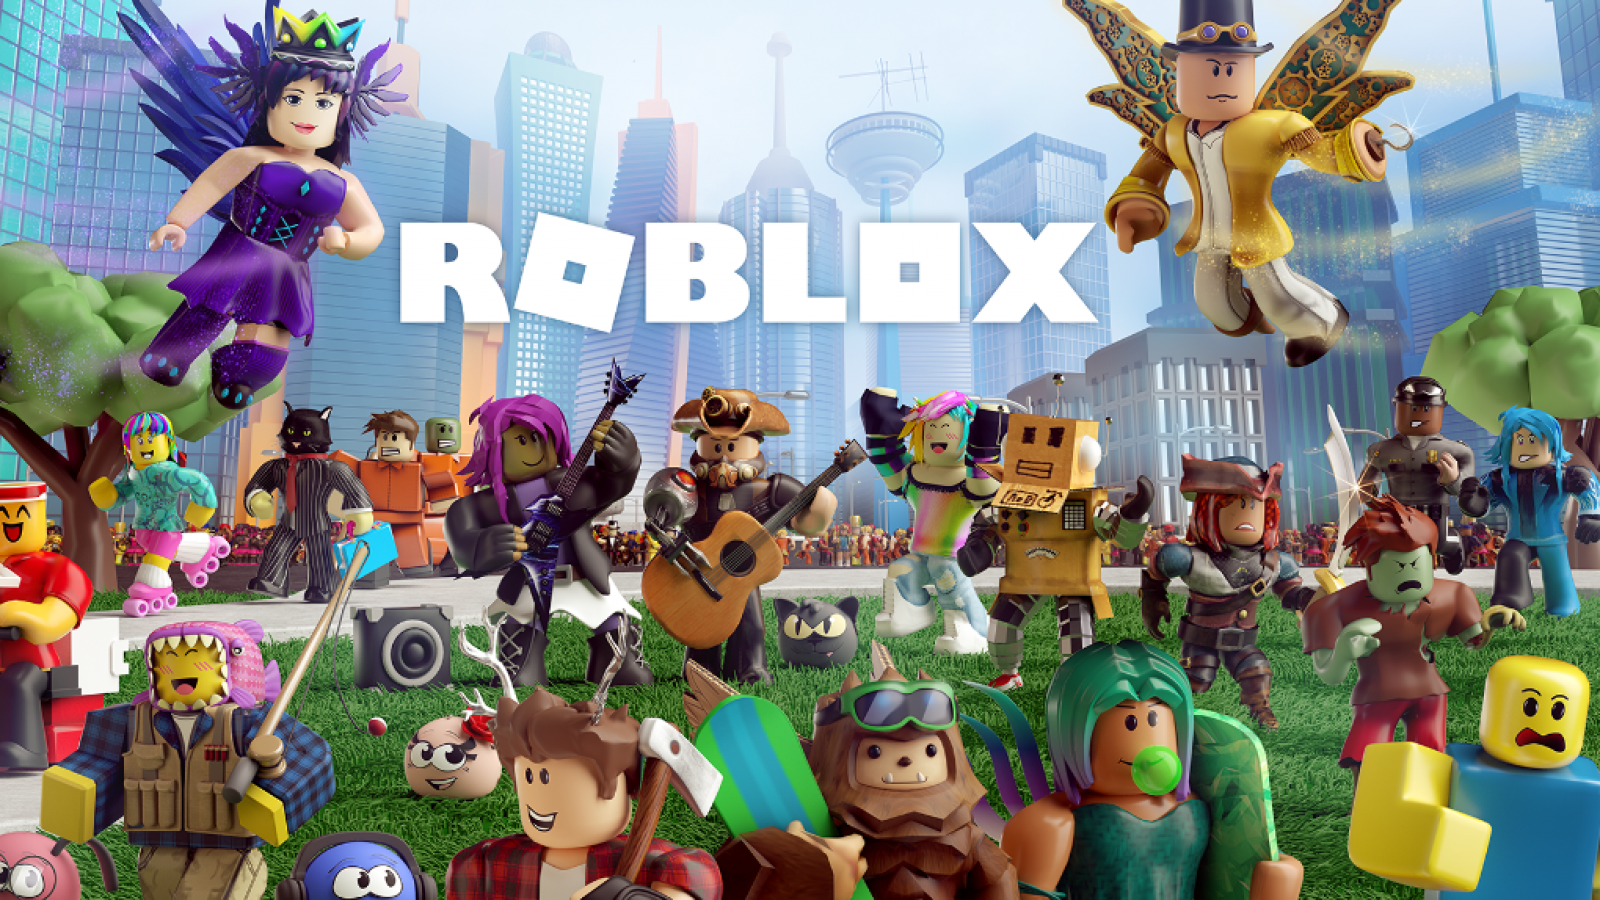 Esl Gaming Android 12 And Roblox Prepares To Ipo Master The Meta - roblox on twitter we want to host more roblox tournaments